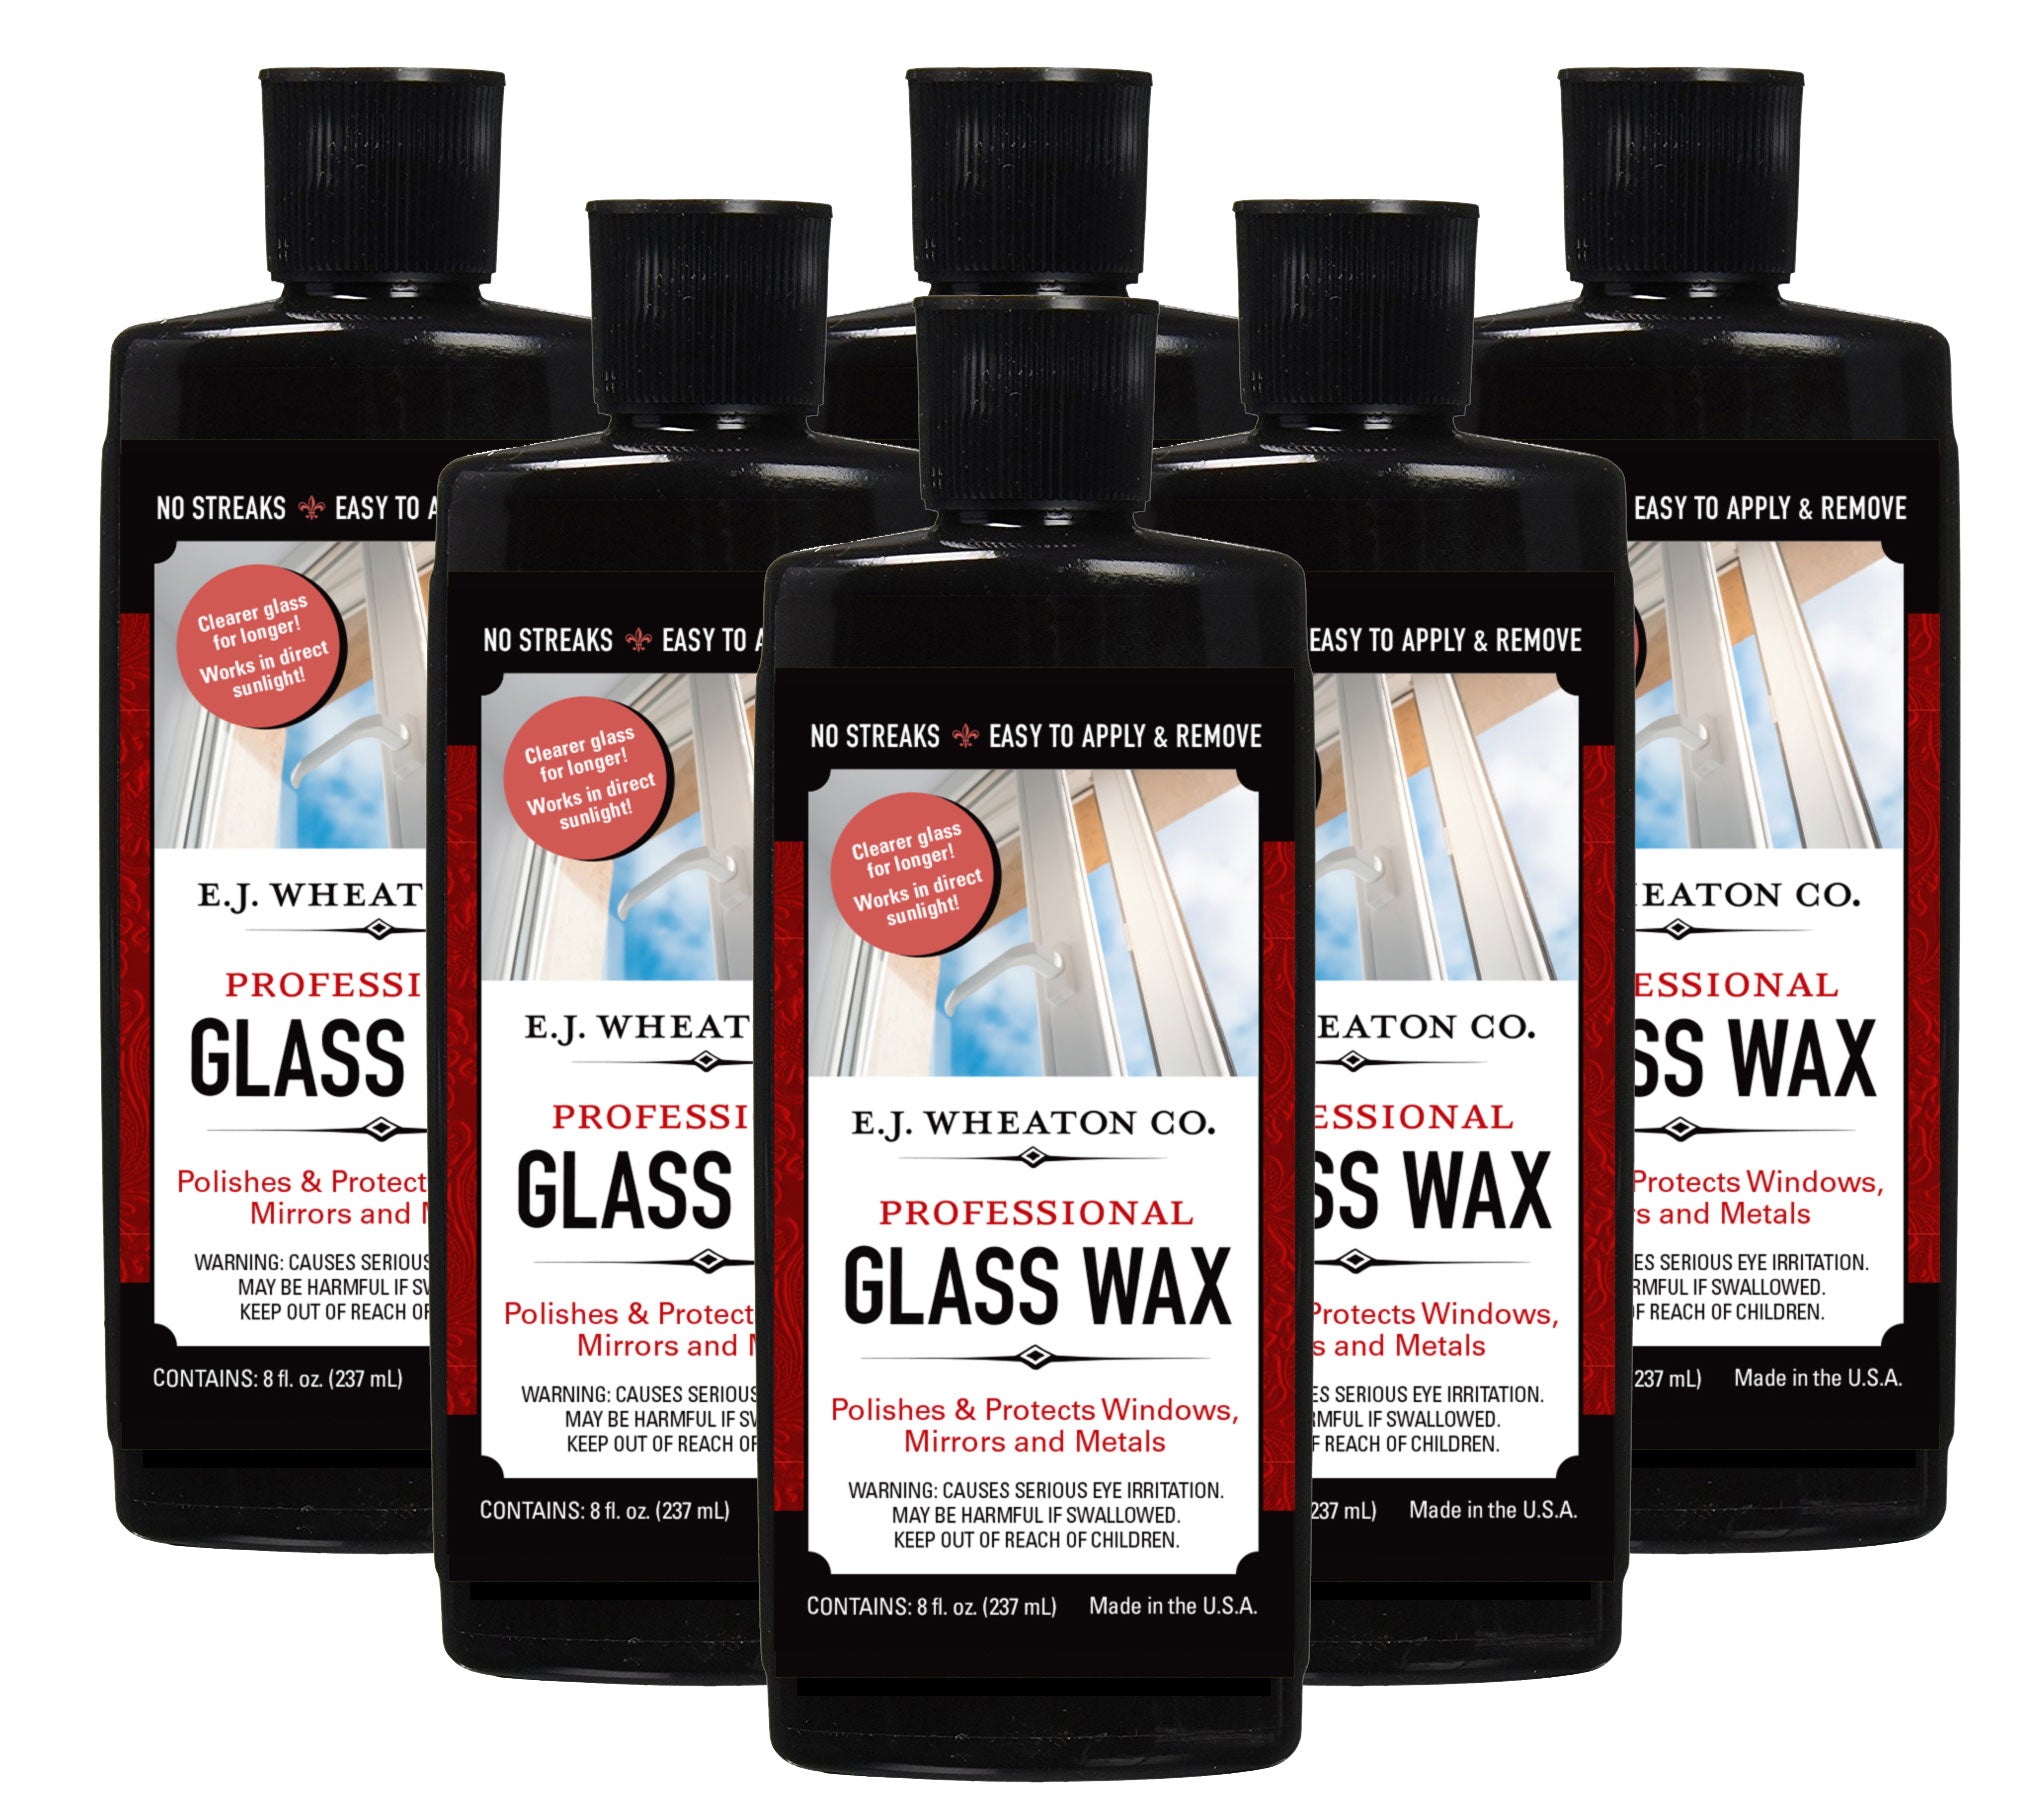 EJ Wheaton Co. Glass Wax, Polishes and Protects Windows, Mirrors and Metal  Surfaces, Dries Chalk White, Easy to Apply and to Remove, Made in USA